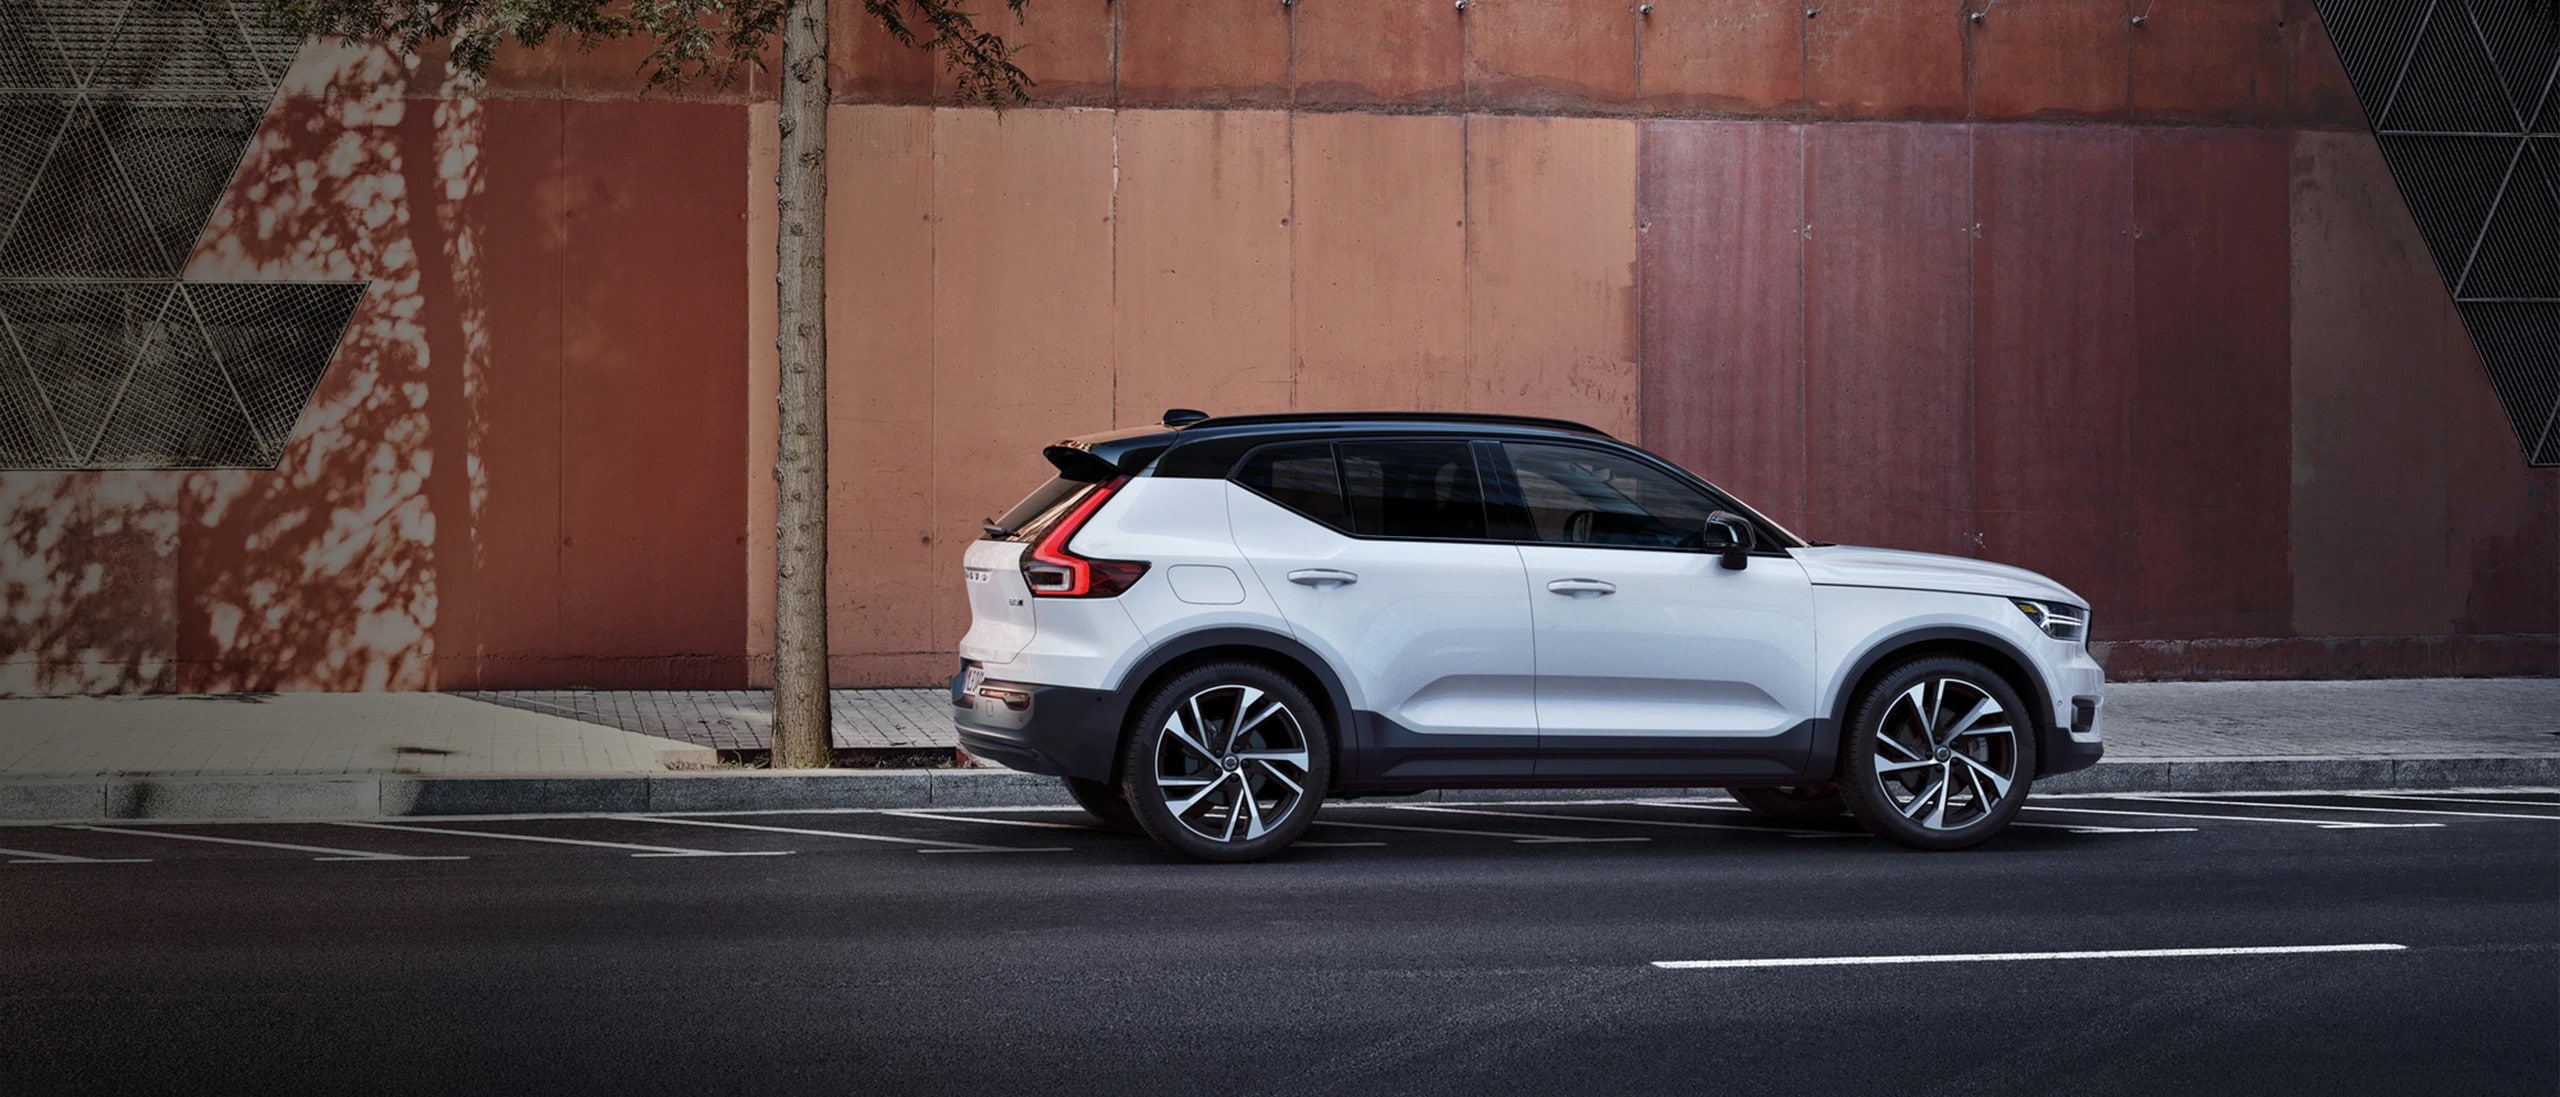 xc40-offers-mobile-us